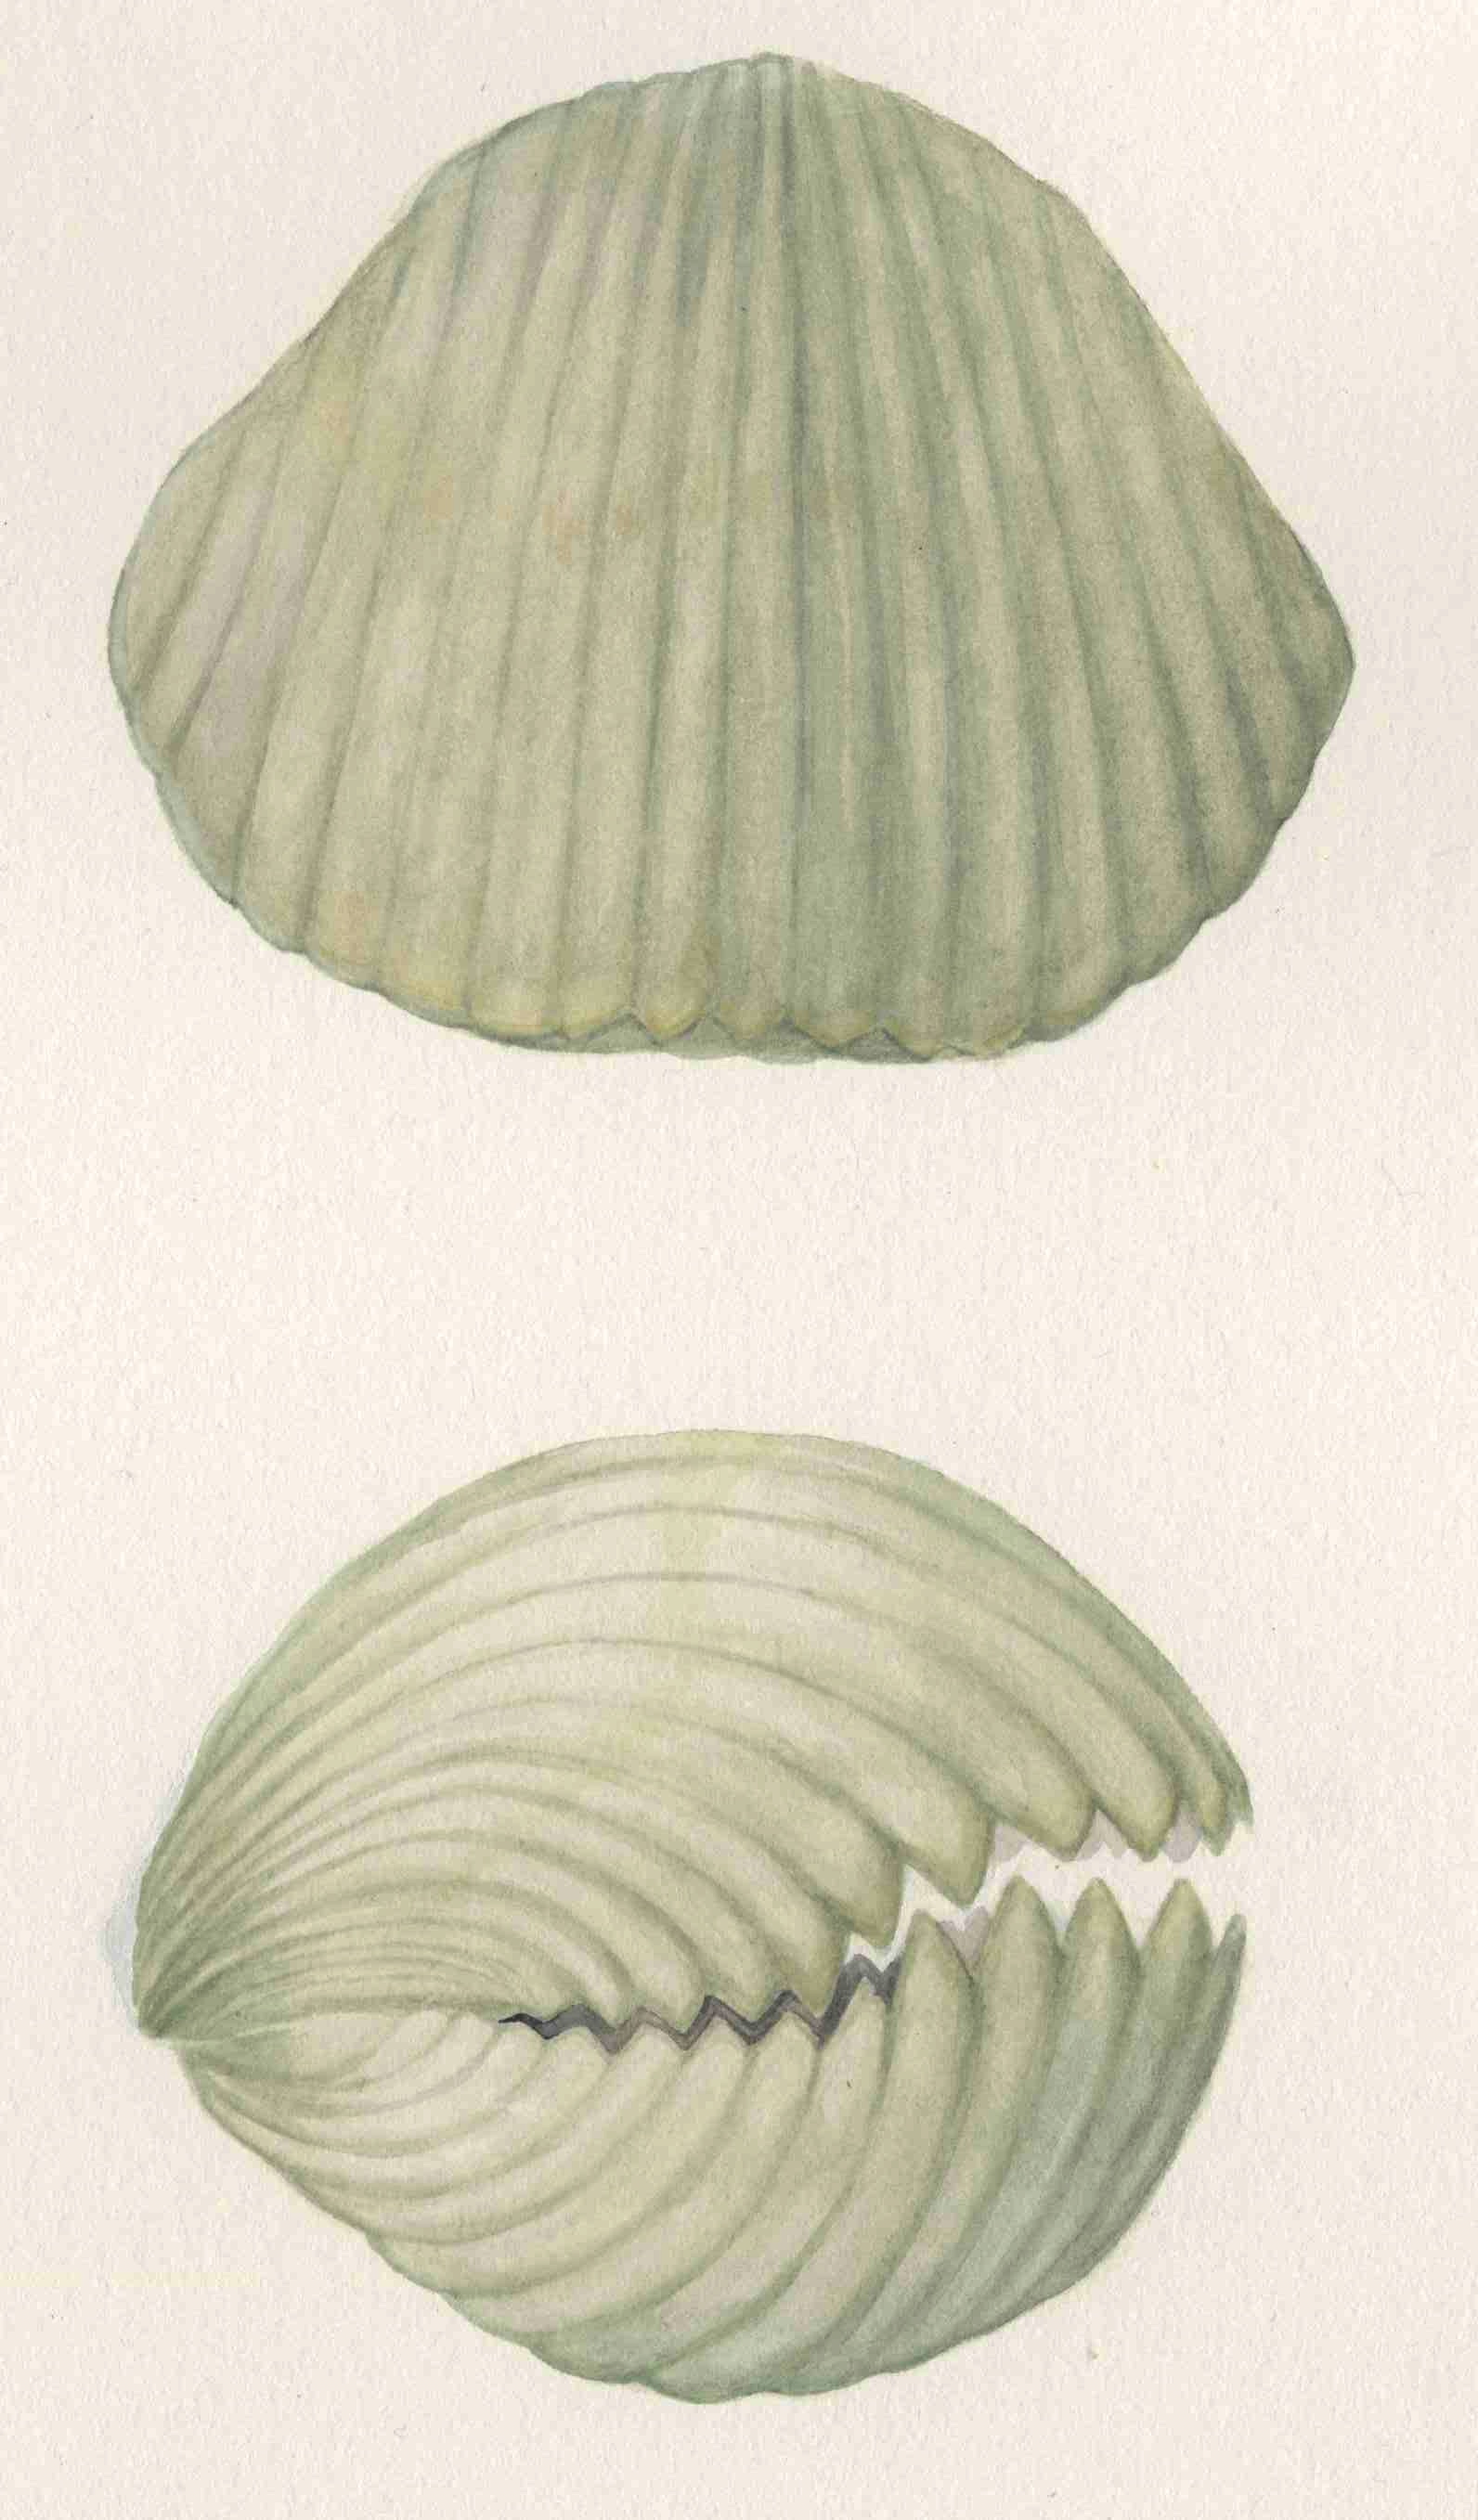 Scientific illustration by Monica Jurik of a pentamerid brachiopod  based on specimens  from Chicago and Indiana. Common Silurian reef brachiopod from the Chicago - Milwaukee area. The illustration is a water color based on specimens in our collections.